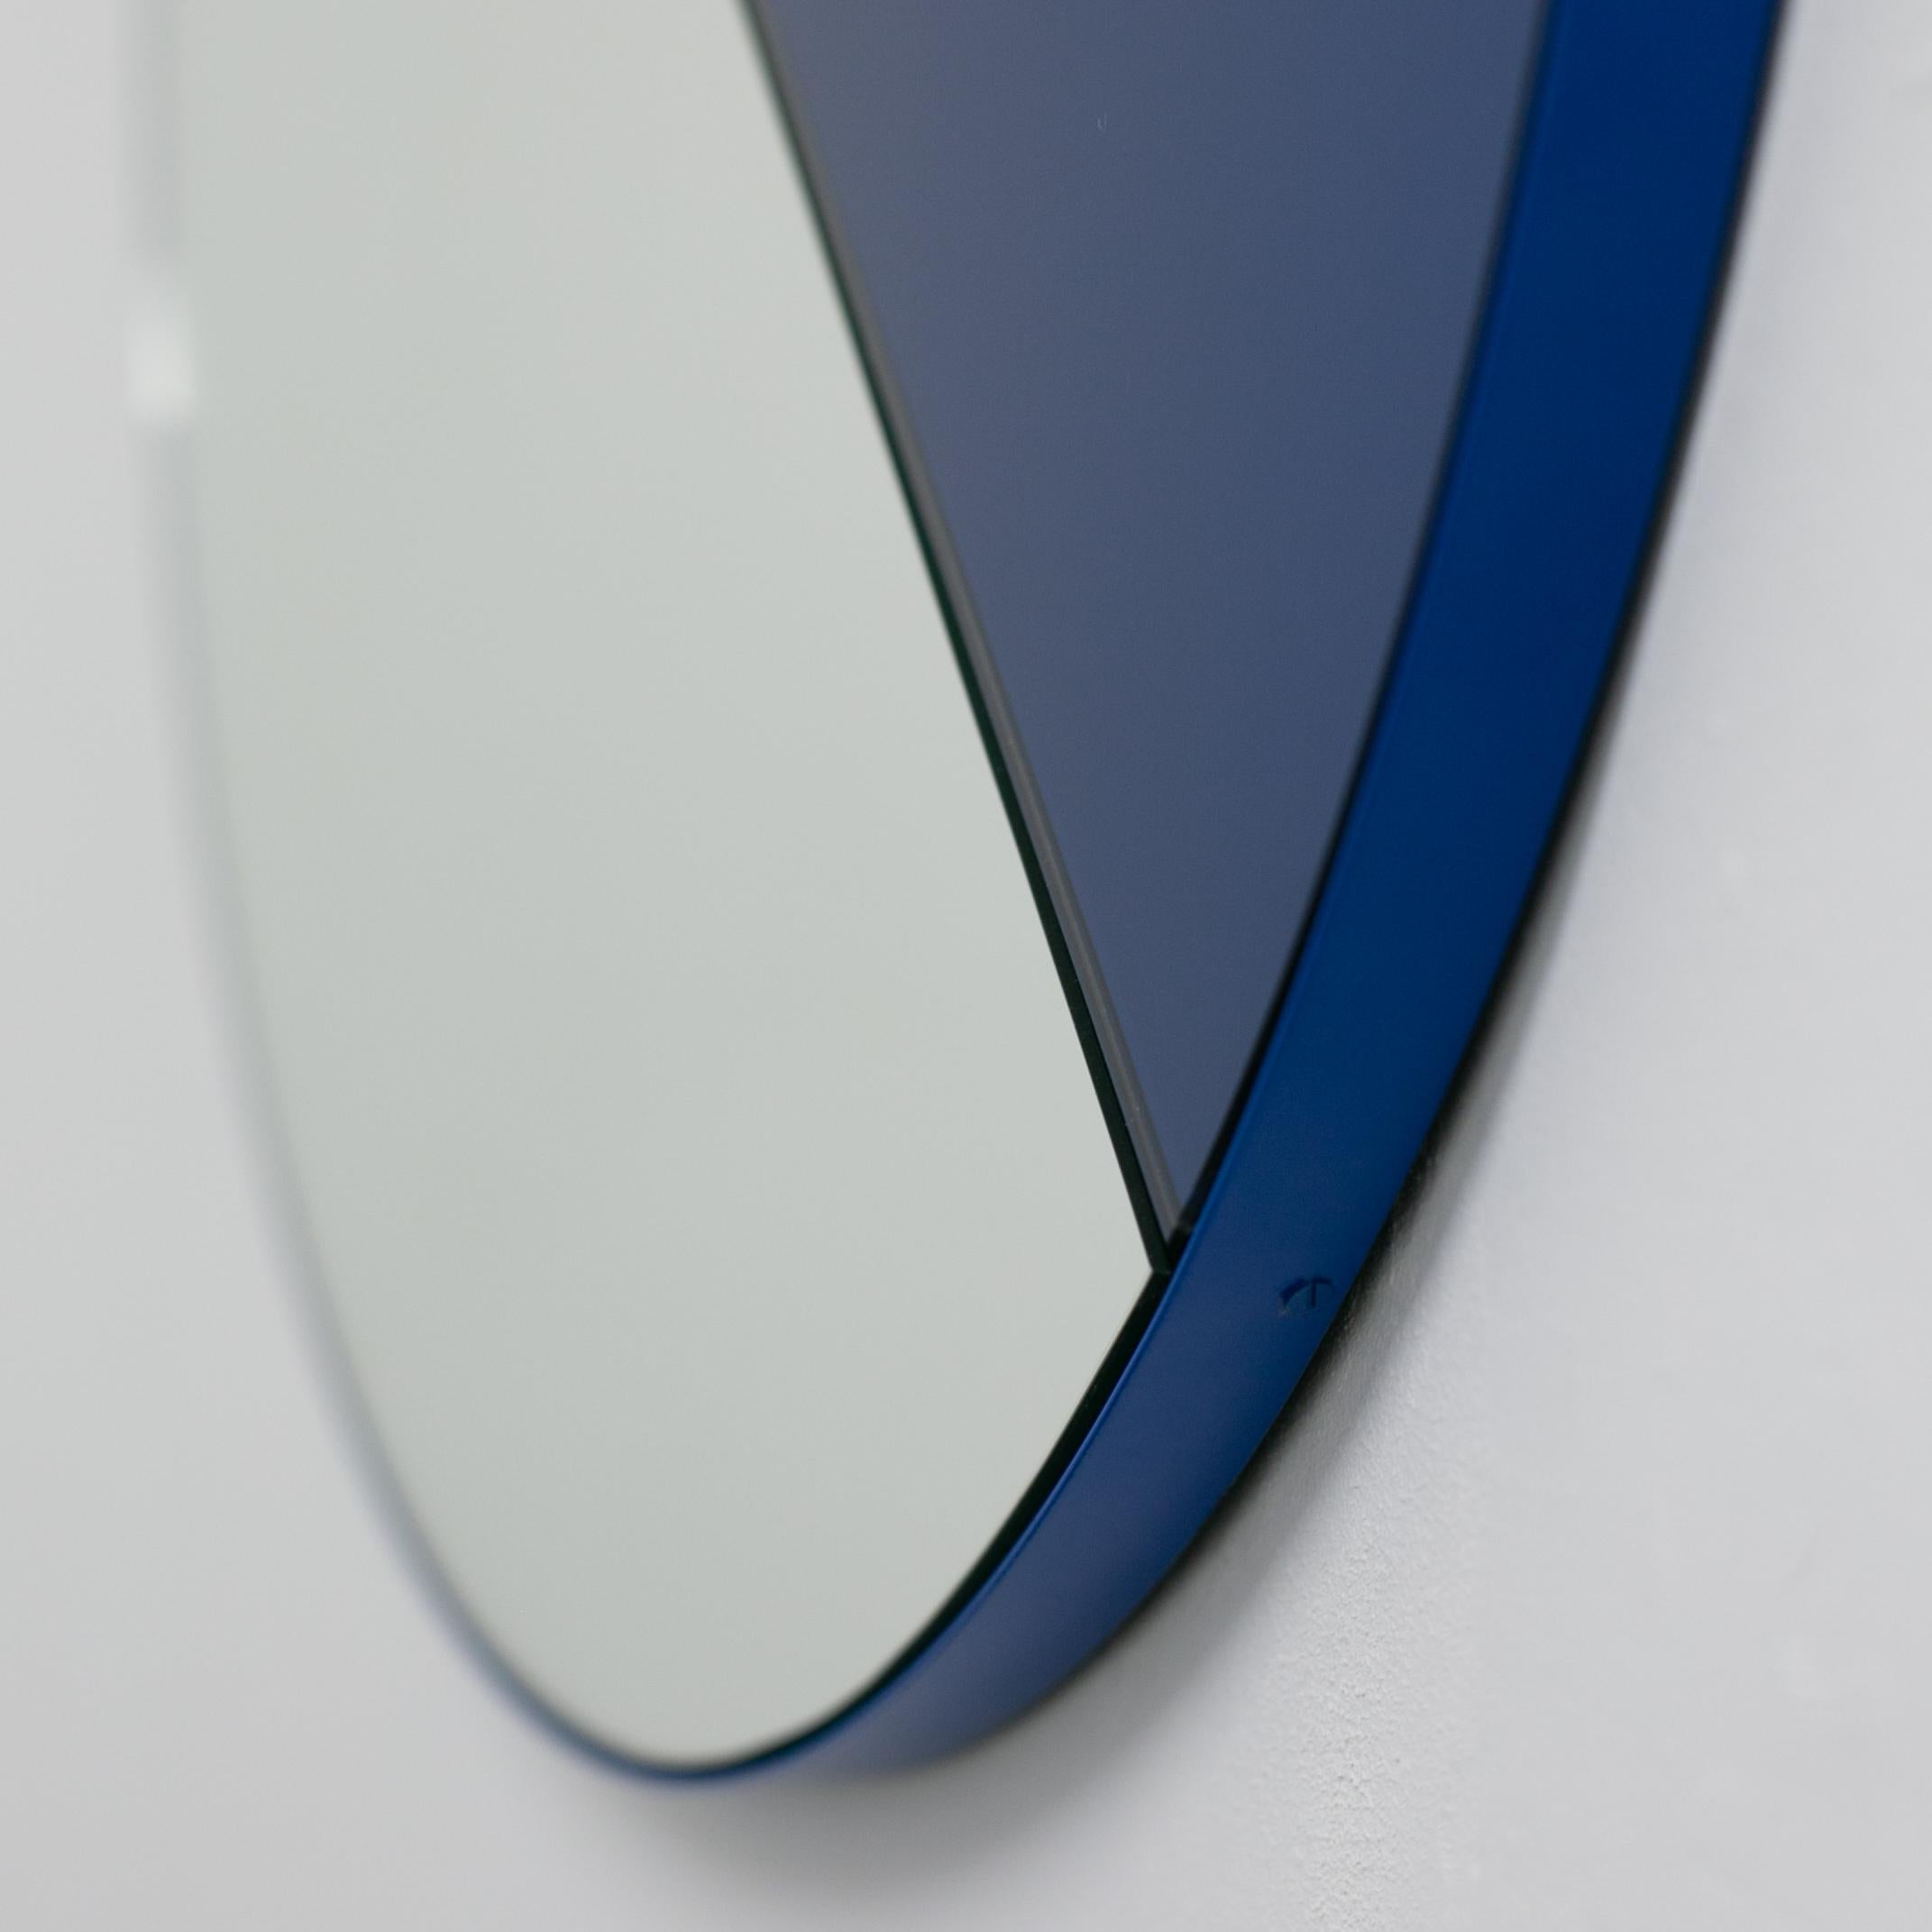 Powder-Coated Orbis Dualis Mixed Blue Tinted Modern Round Mirror with Blue Frame, XL For Sale